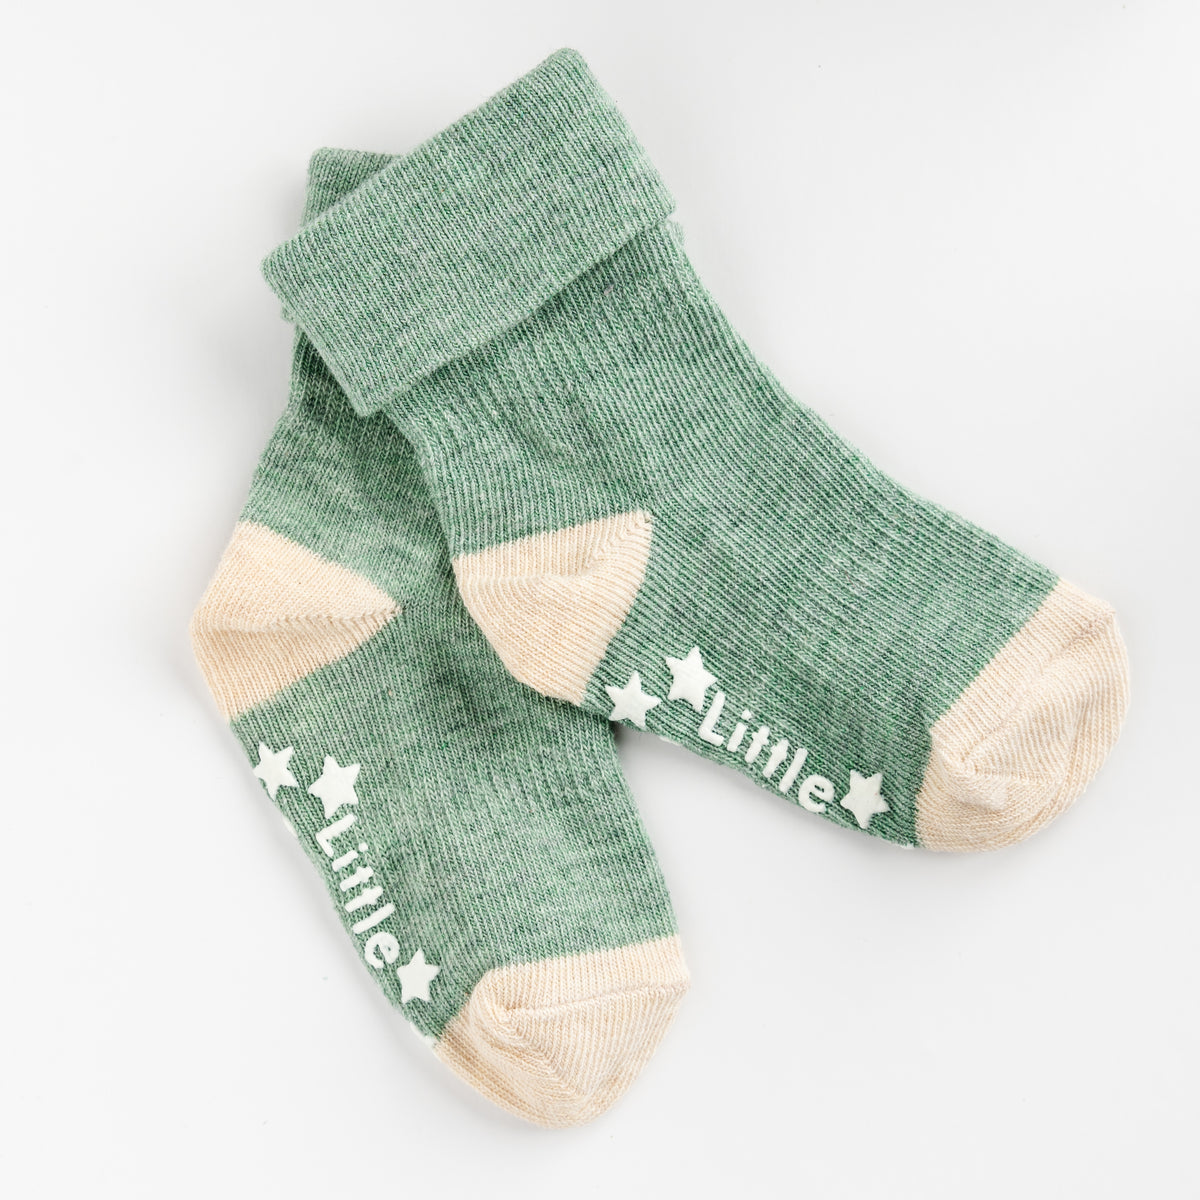 Non-Slip Stay On Socks in Forest Green with Oatmeal